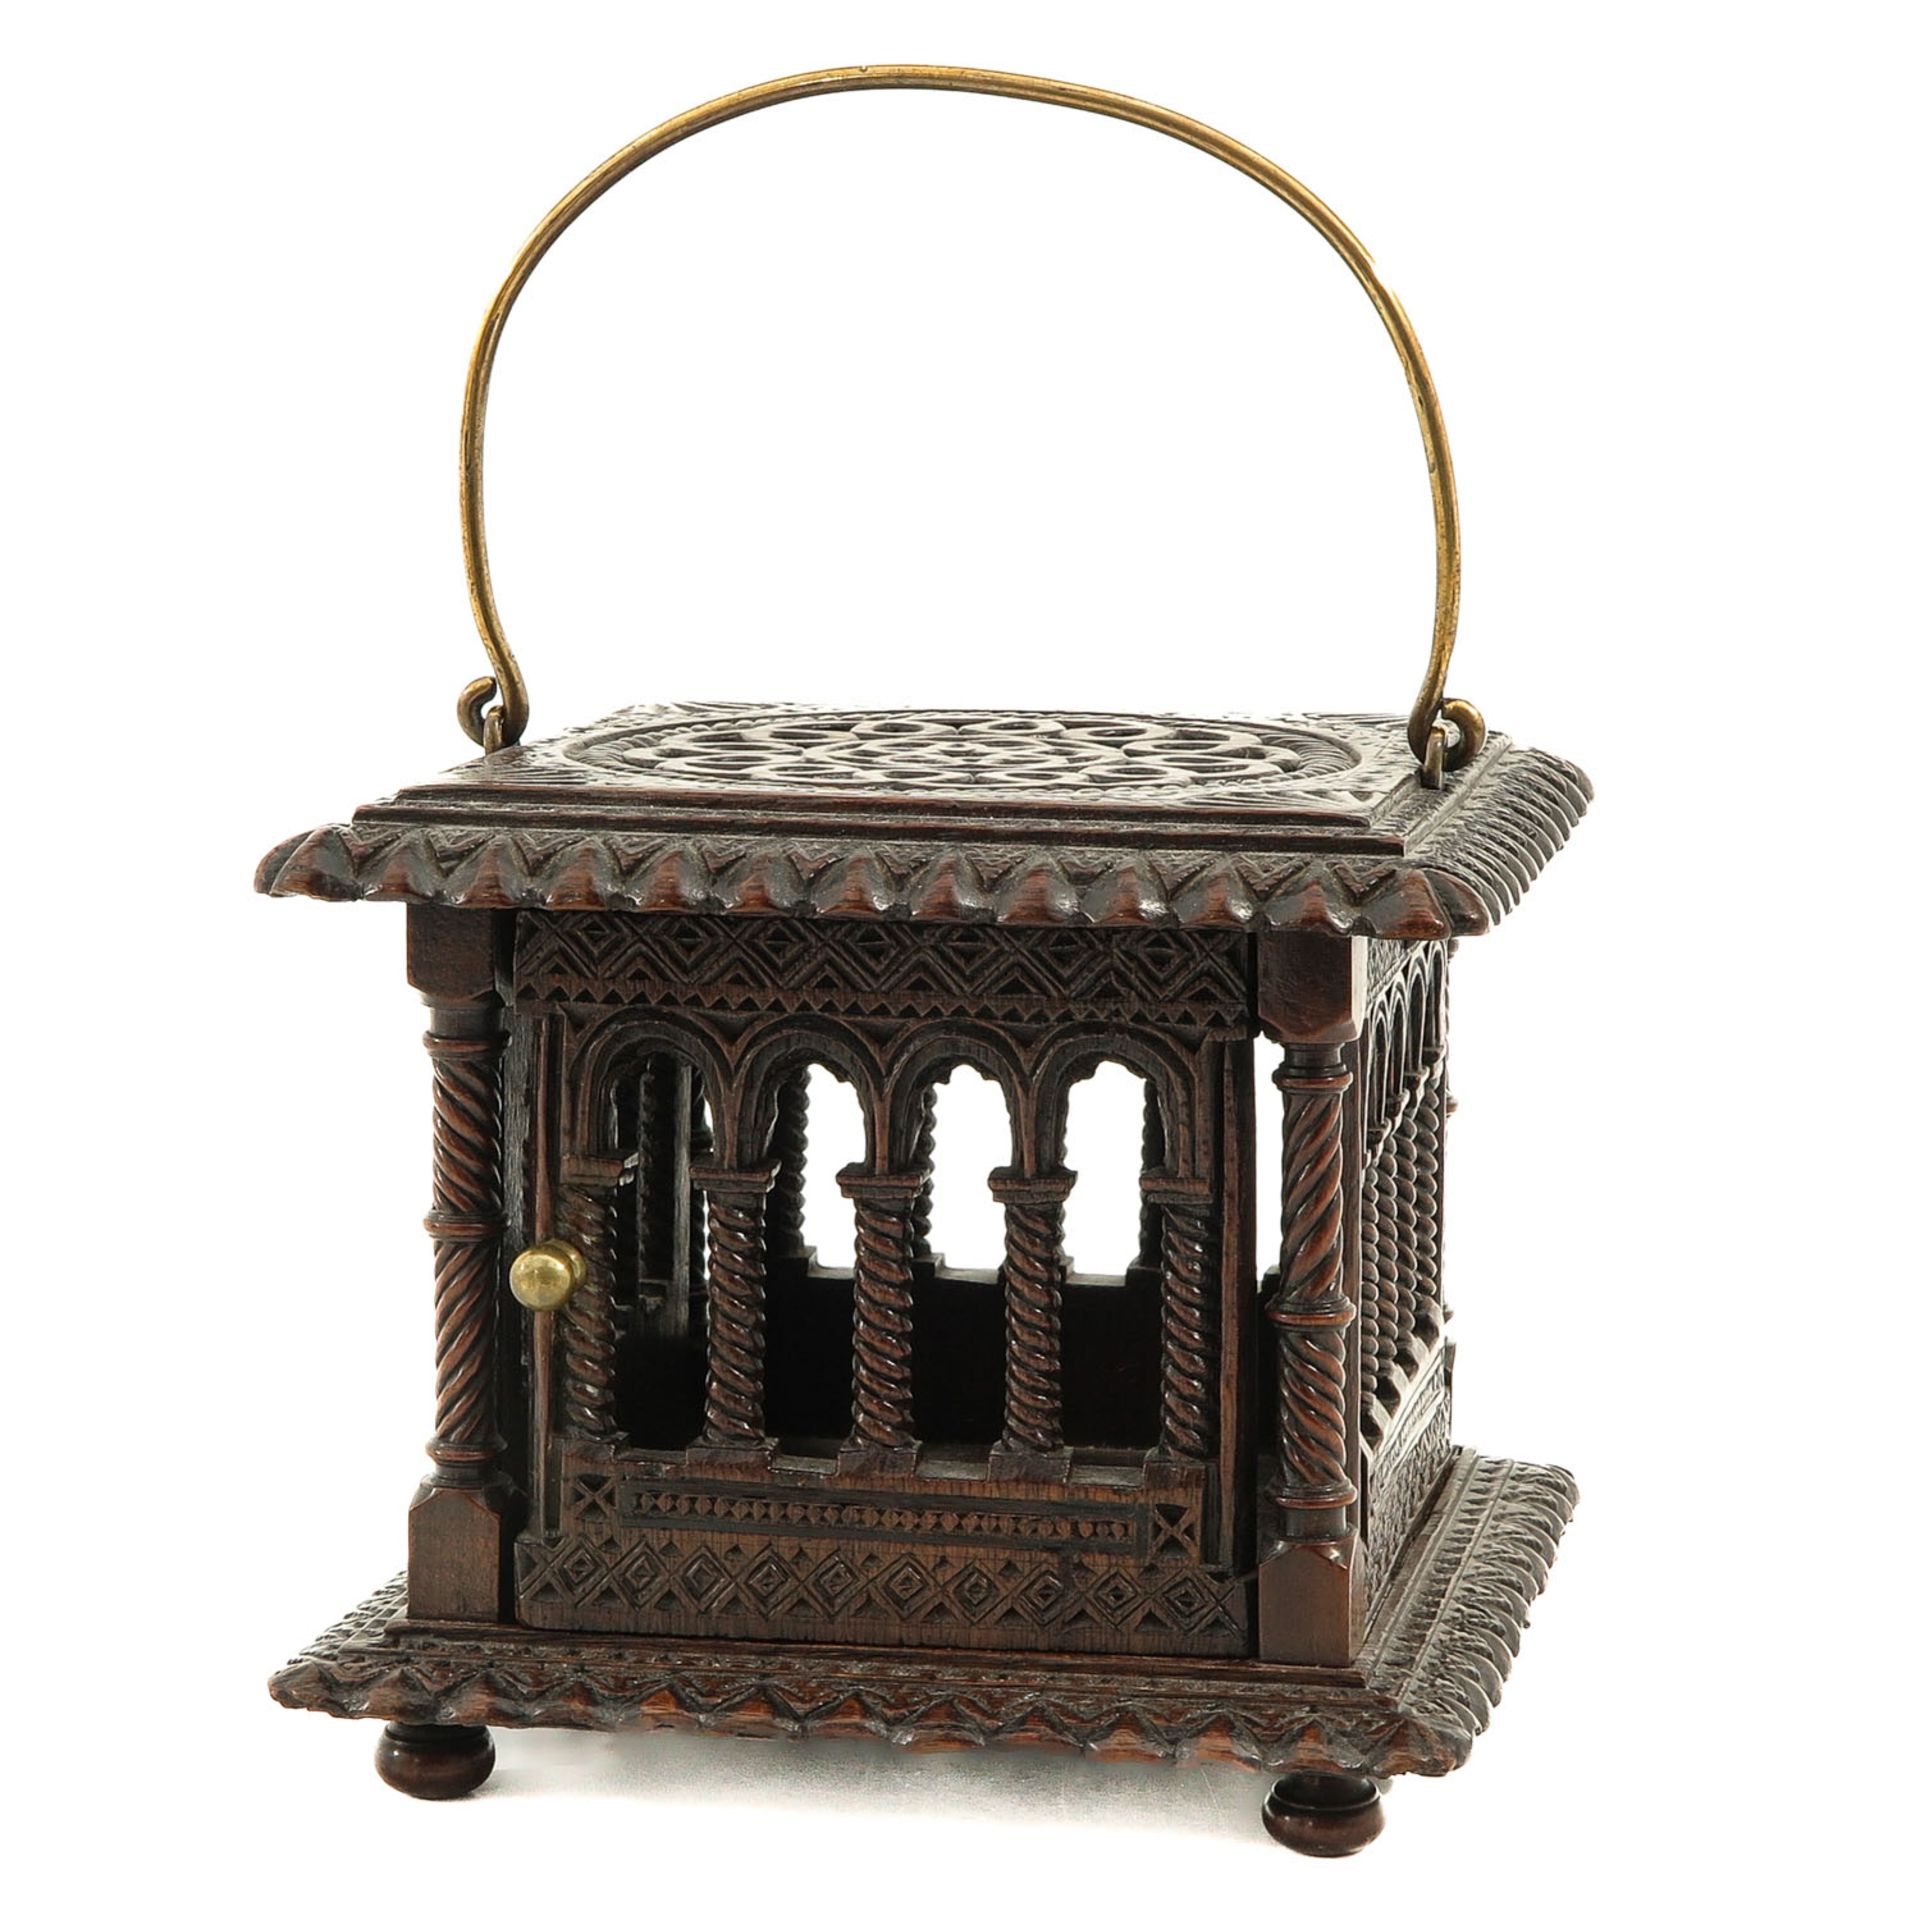 A Carved Wood Stove